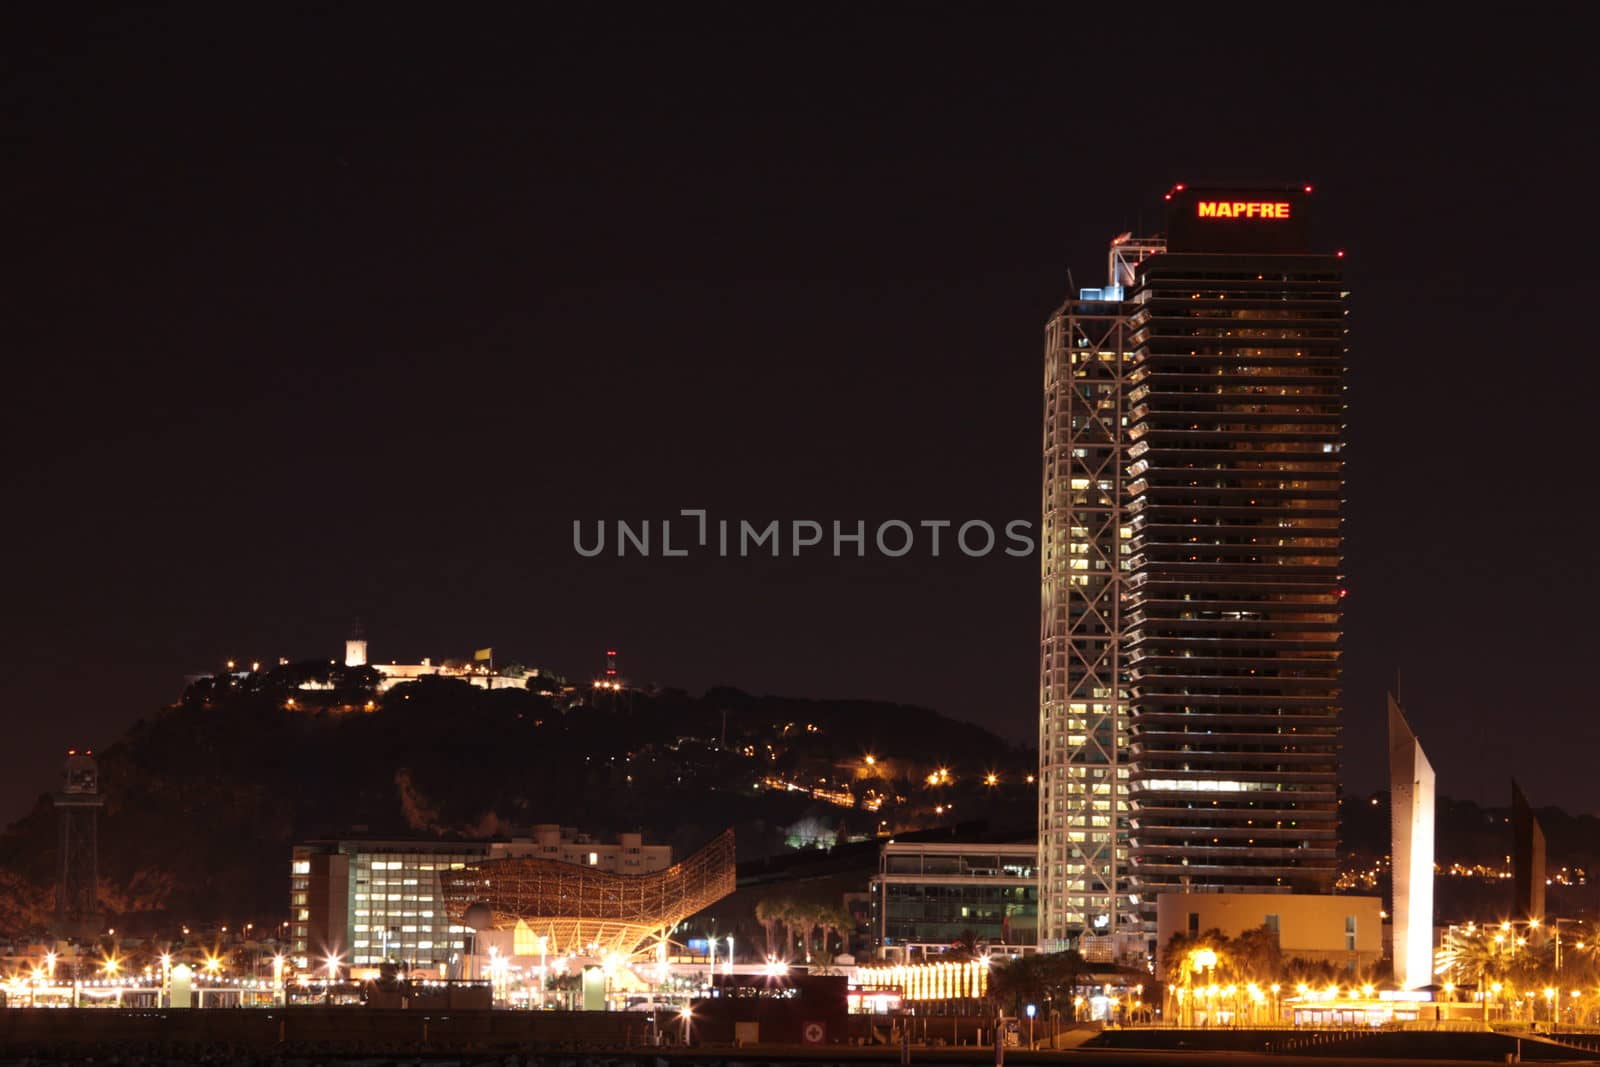 Torre Mapfre and Hotel Arts Barcelona, Spain by vlad-m